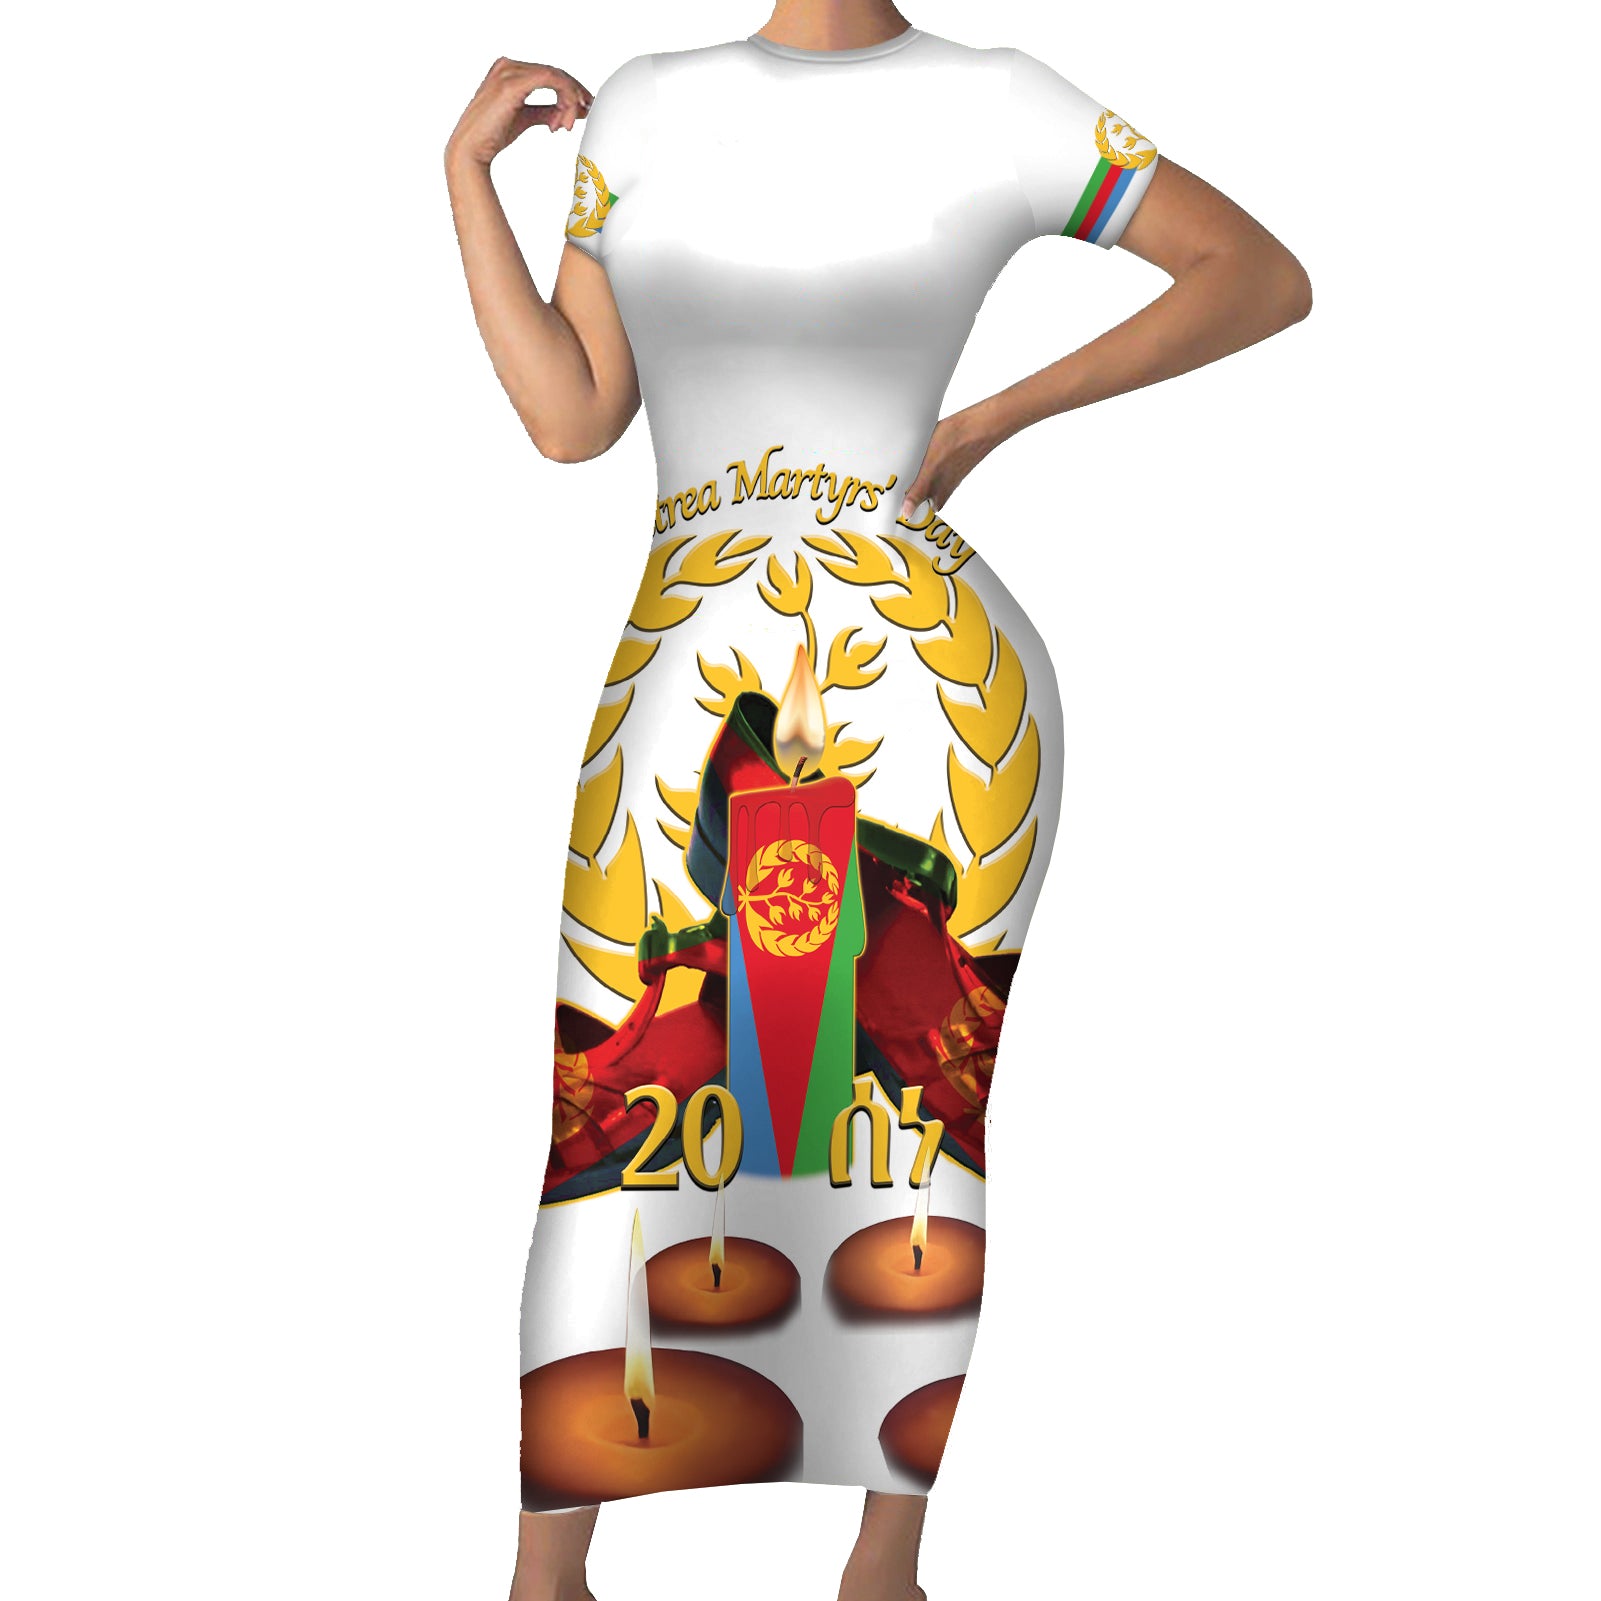 Custom Eritrea Martyrs' Day Short Sleeve Bodycon Dress 20 June Shida Shoes With Candles - White